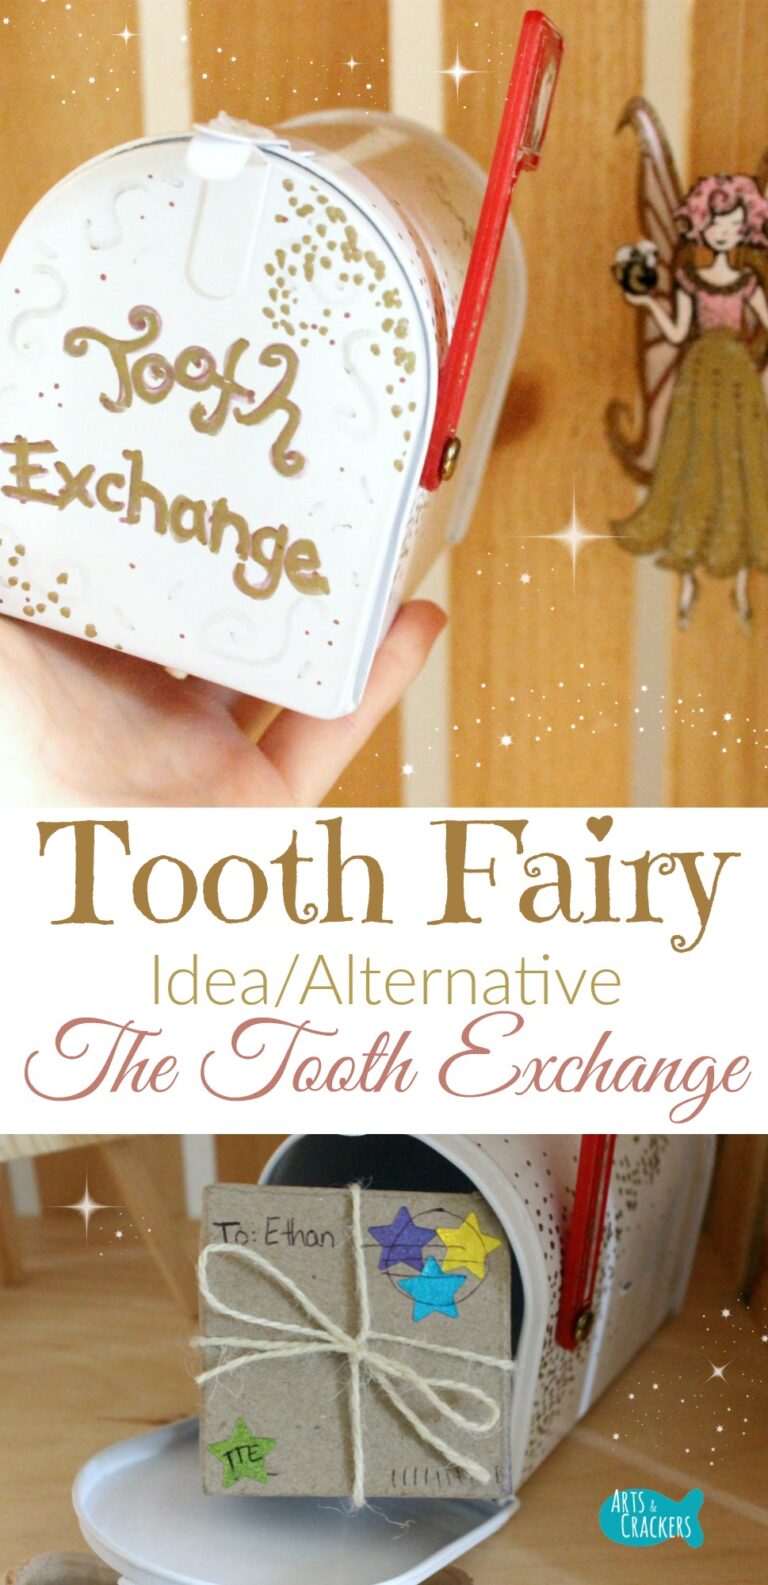 where-to-buy-tooth-fairy-box